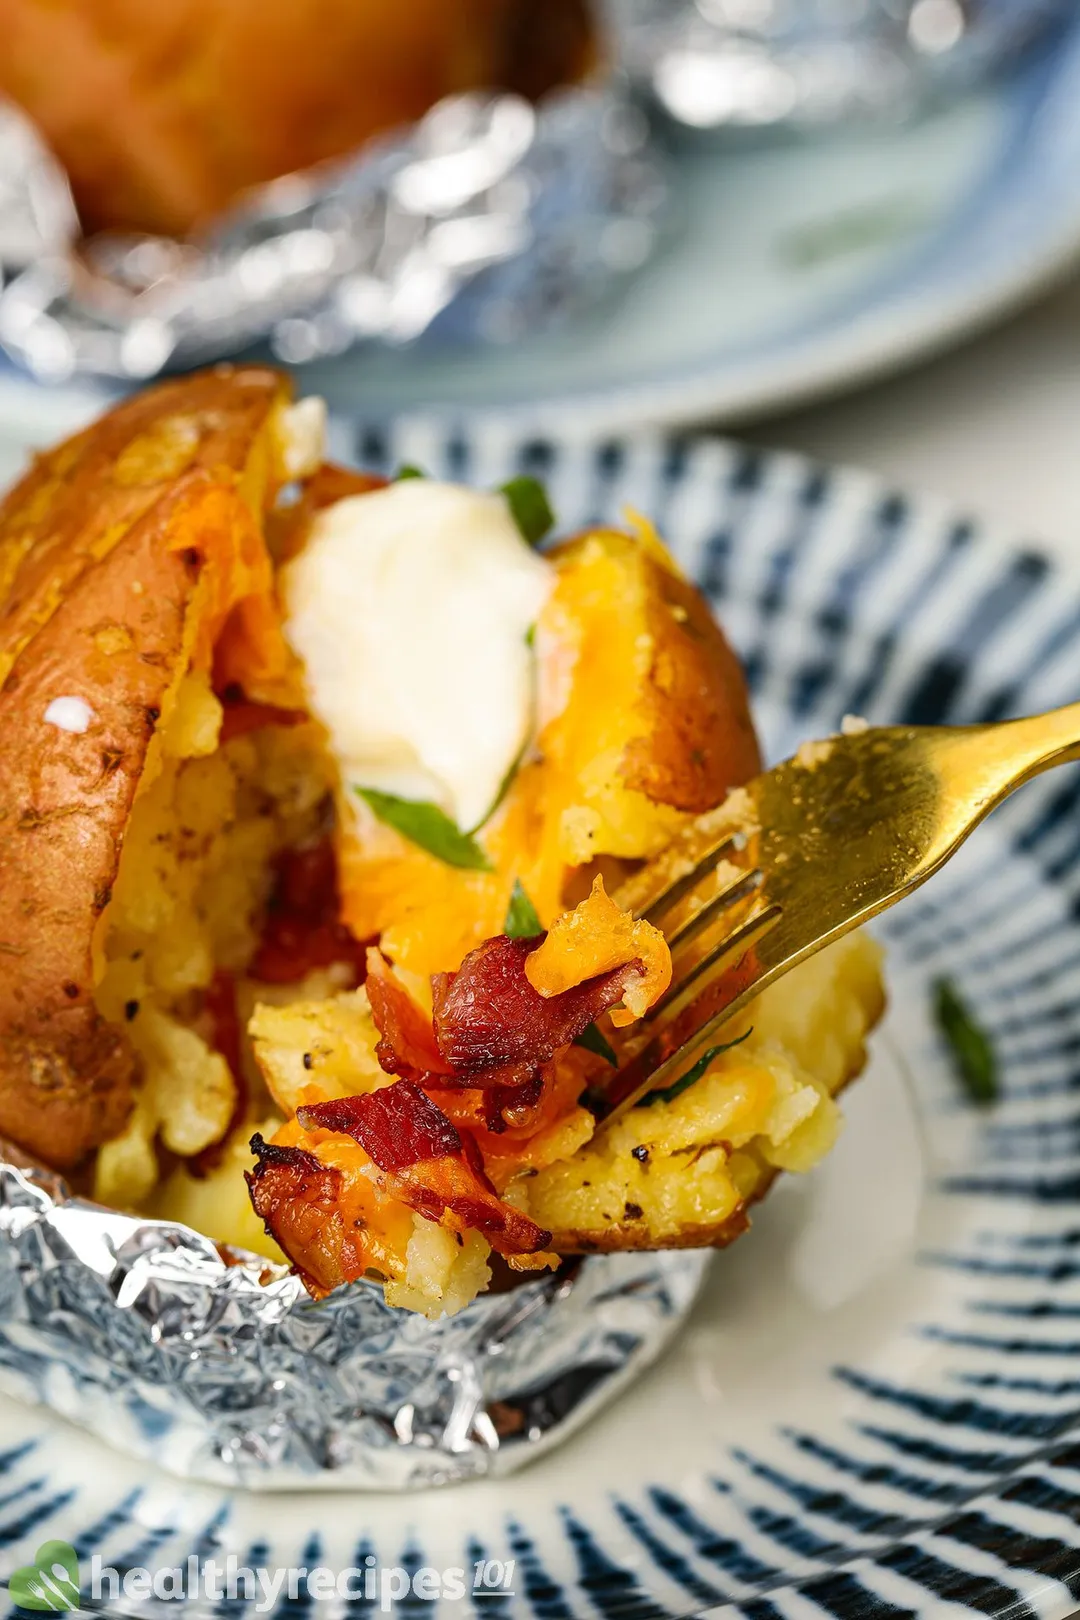 a plate of baked potato with bacon, cheese and yogurt